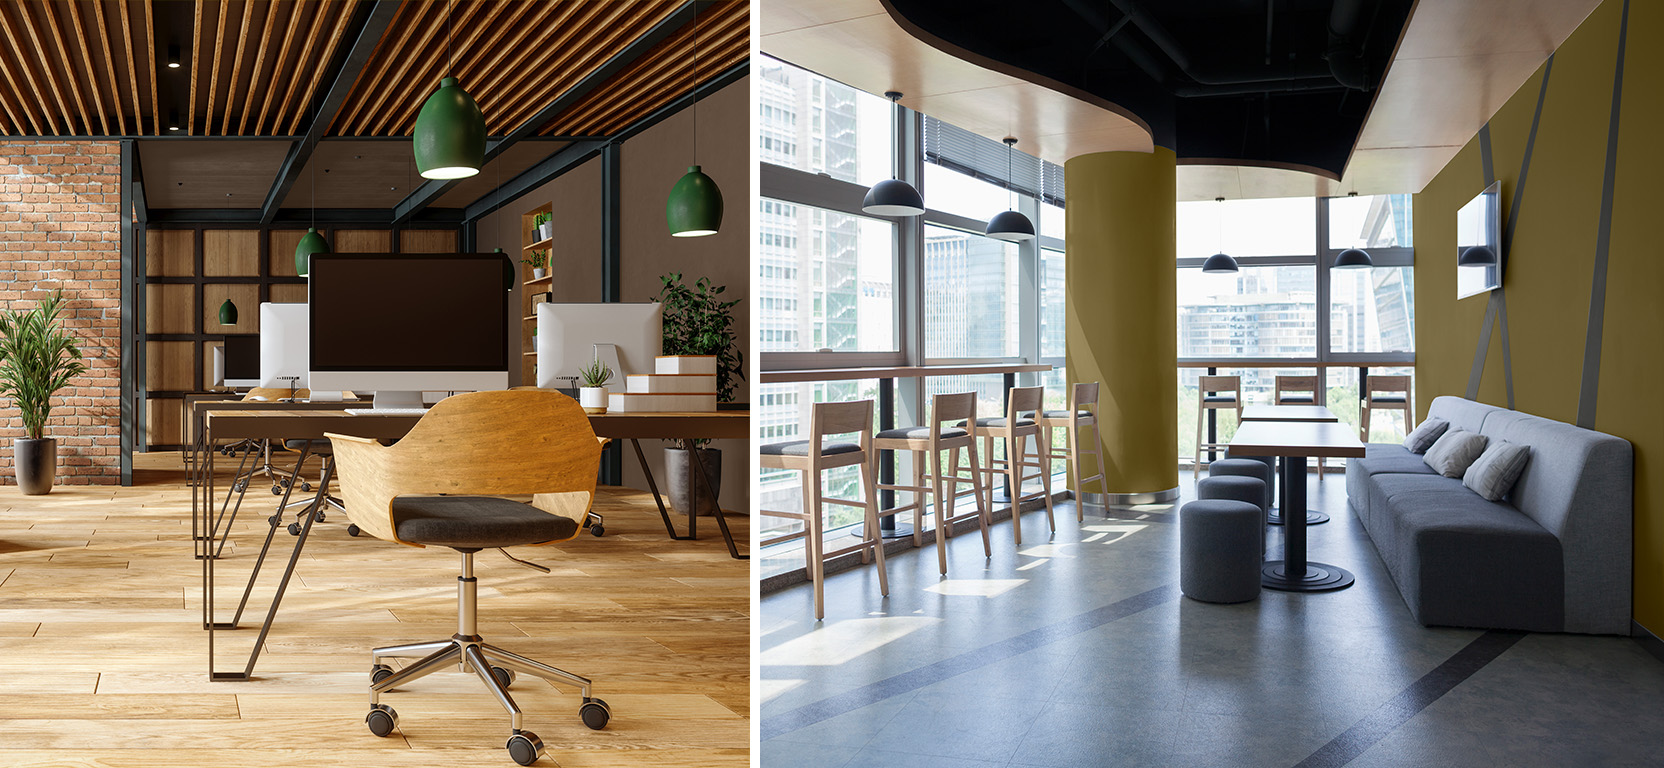 Left image: Modern office with natural color scheme, slatted ceiling, green pendant lighting, wood floors, wood desks with geometric legs and wood-backed swivel chairs. Right image: Urban coworking space with dark green and gray color scheme, wall of windows with counter facing out, and modern banquette seating at low tables against the wall.